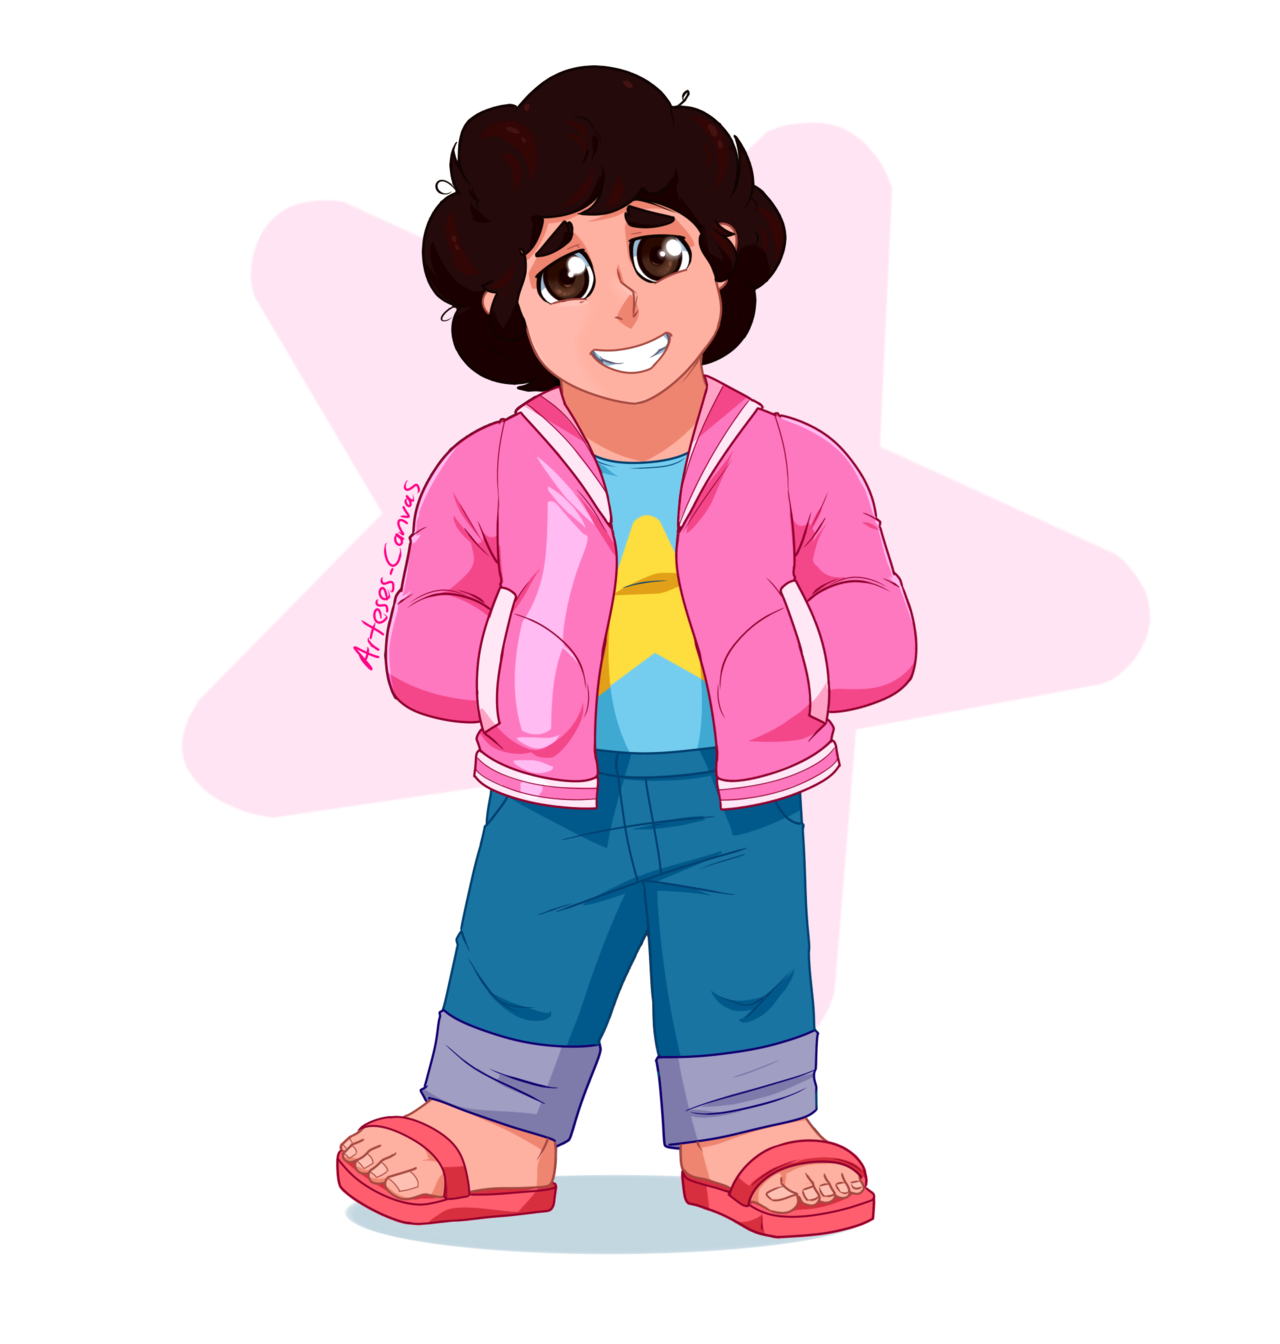 My boys growing up :,) but for real i love his new look! i liked his look in his bday episode where he got the pink shirt from connie and im glad they are bringing it back but better! im hyped!